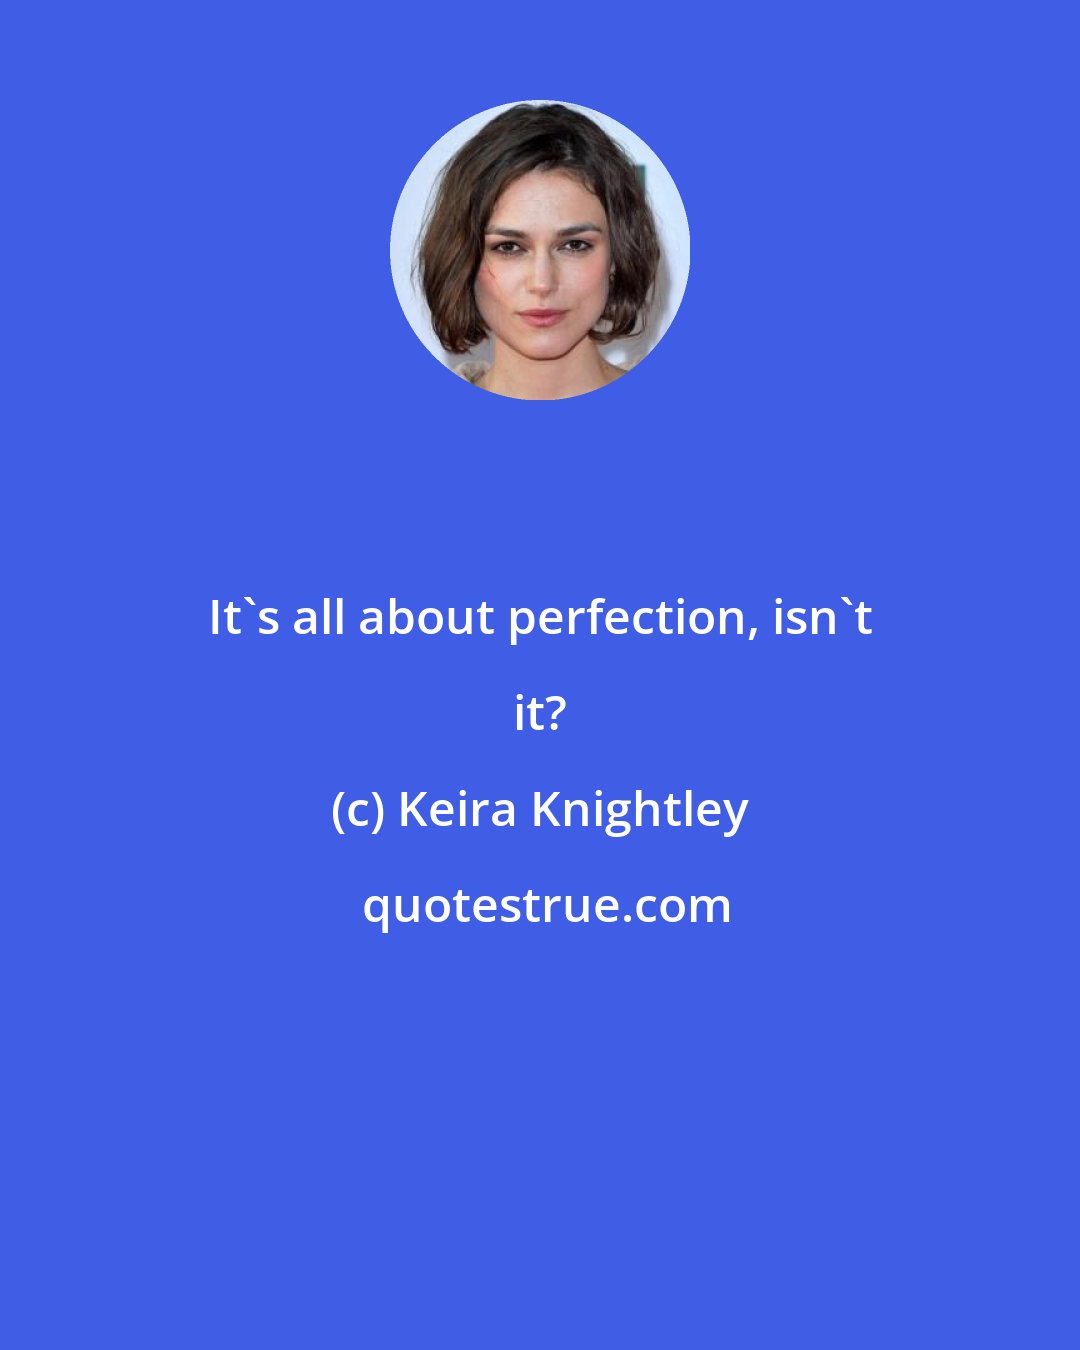 Keira Knightley: It's all about perfection, isn't it?